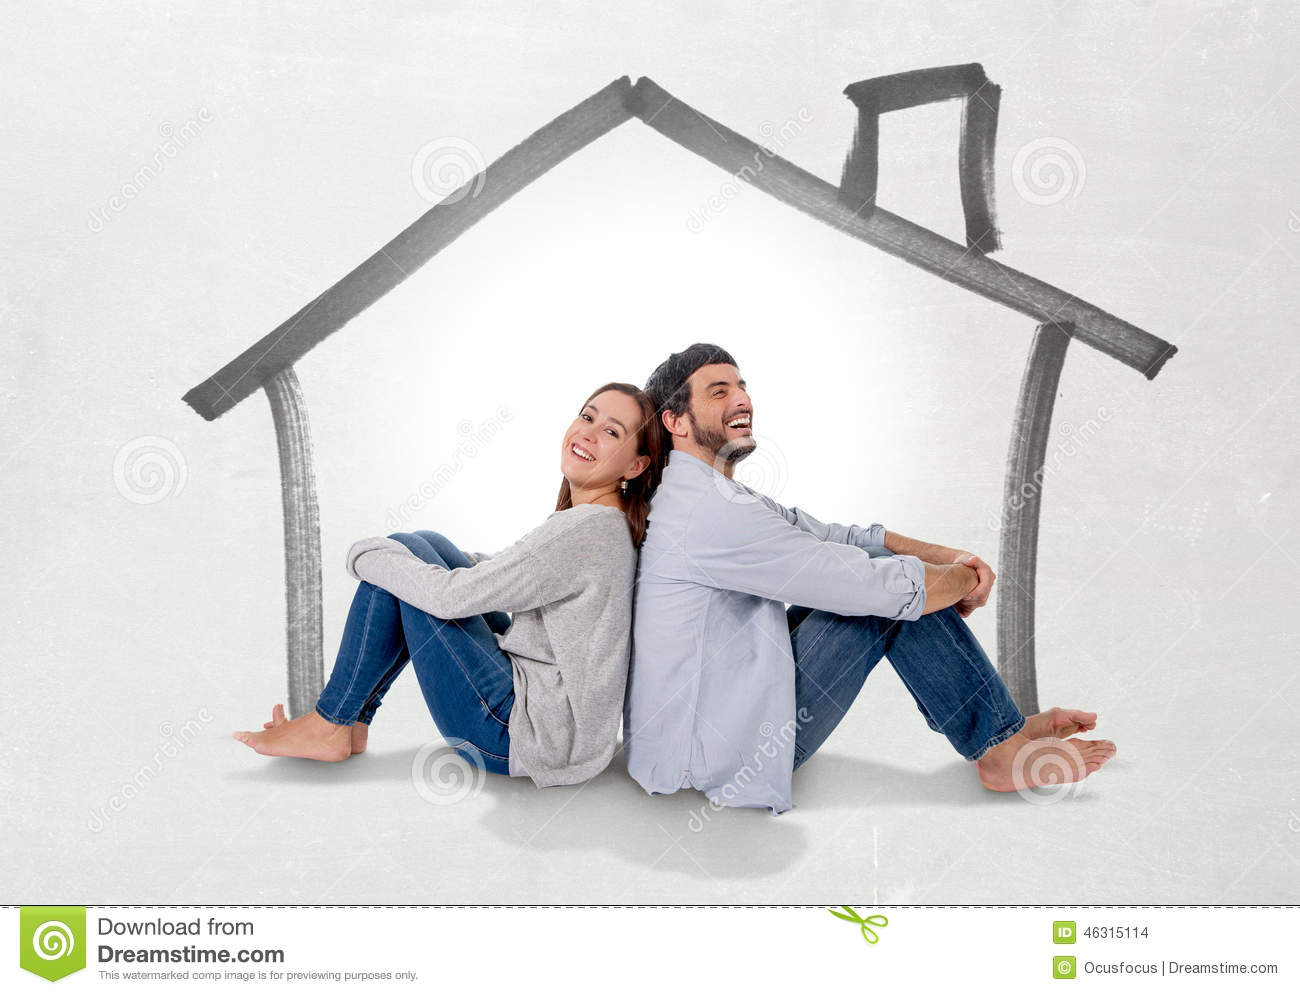 young-couple-dreaming-imaging-their-new-house-real-state-concept-attractive-modern-love-smiling-happy-together-sitting-46315114